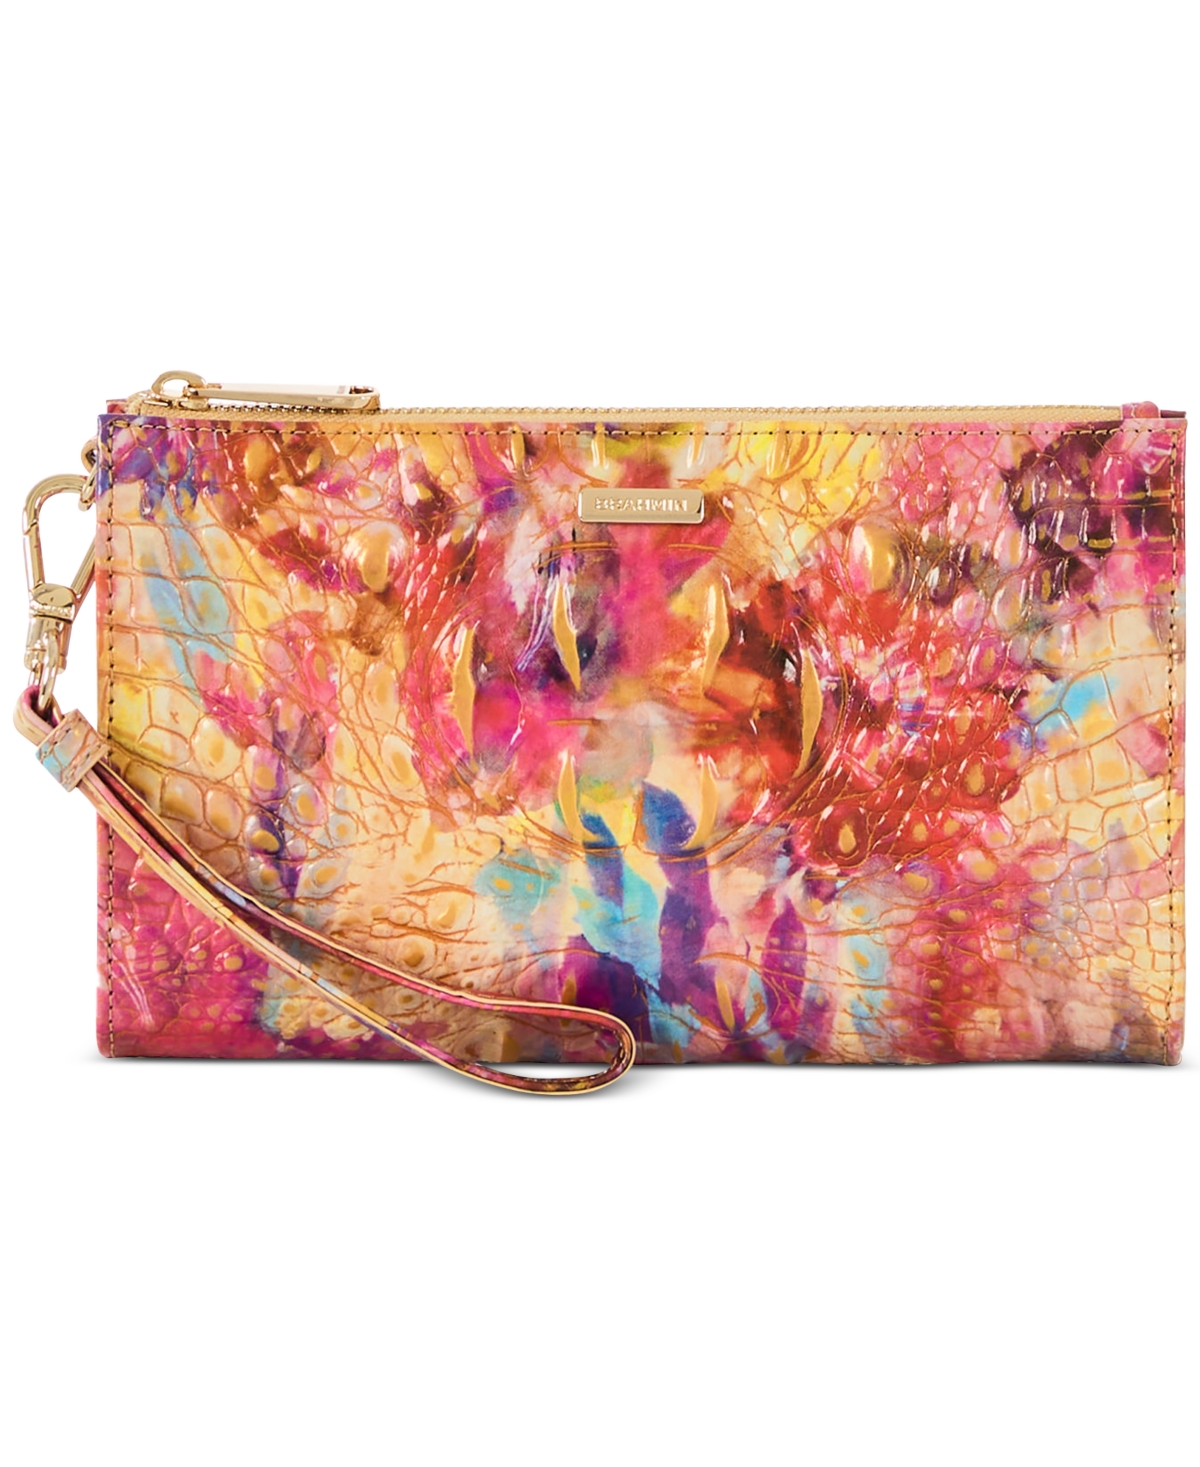 BRAHMIN DAISY MELBOURNE EMBOSSED LEATHER CLUTCH